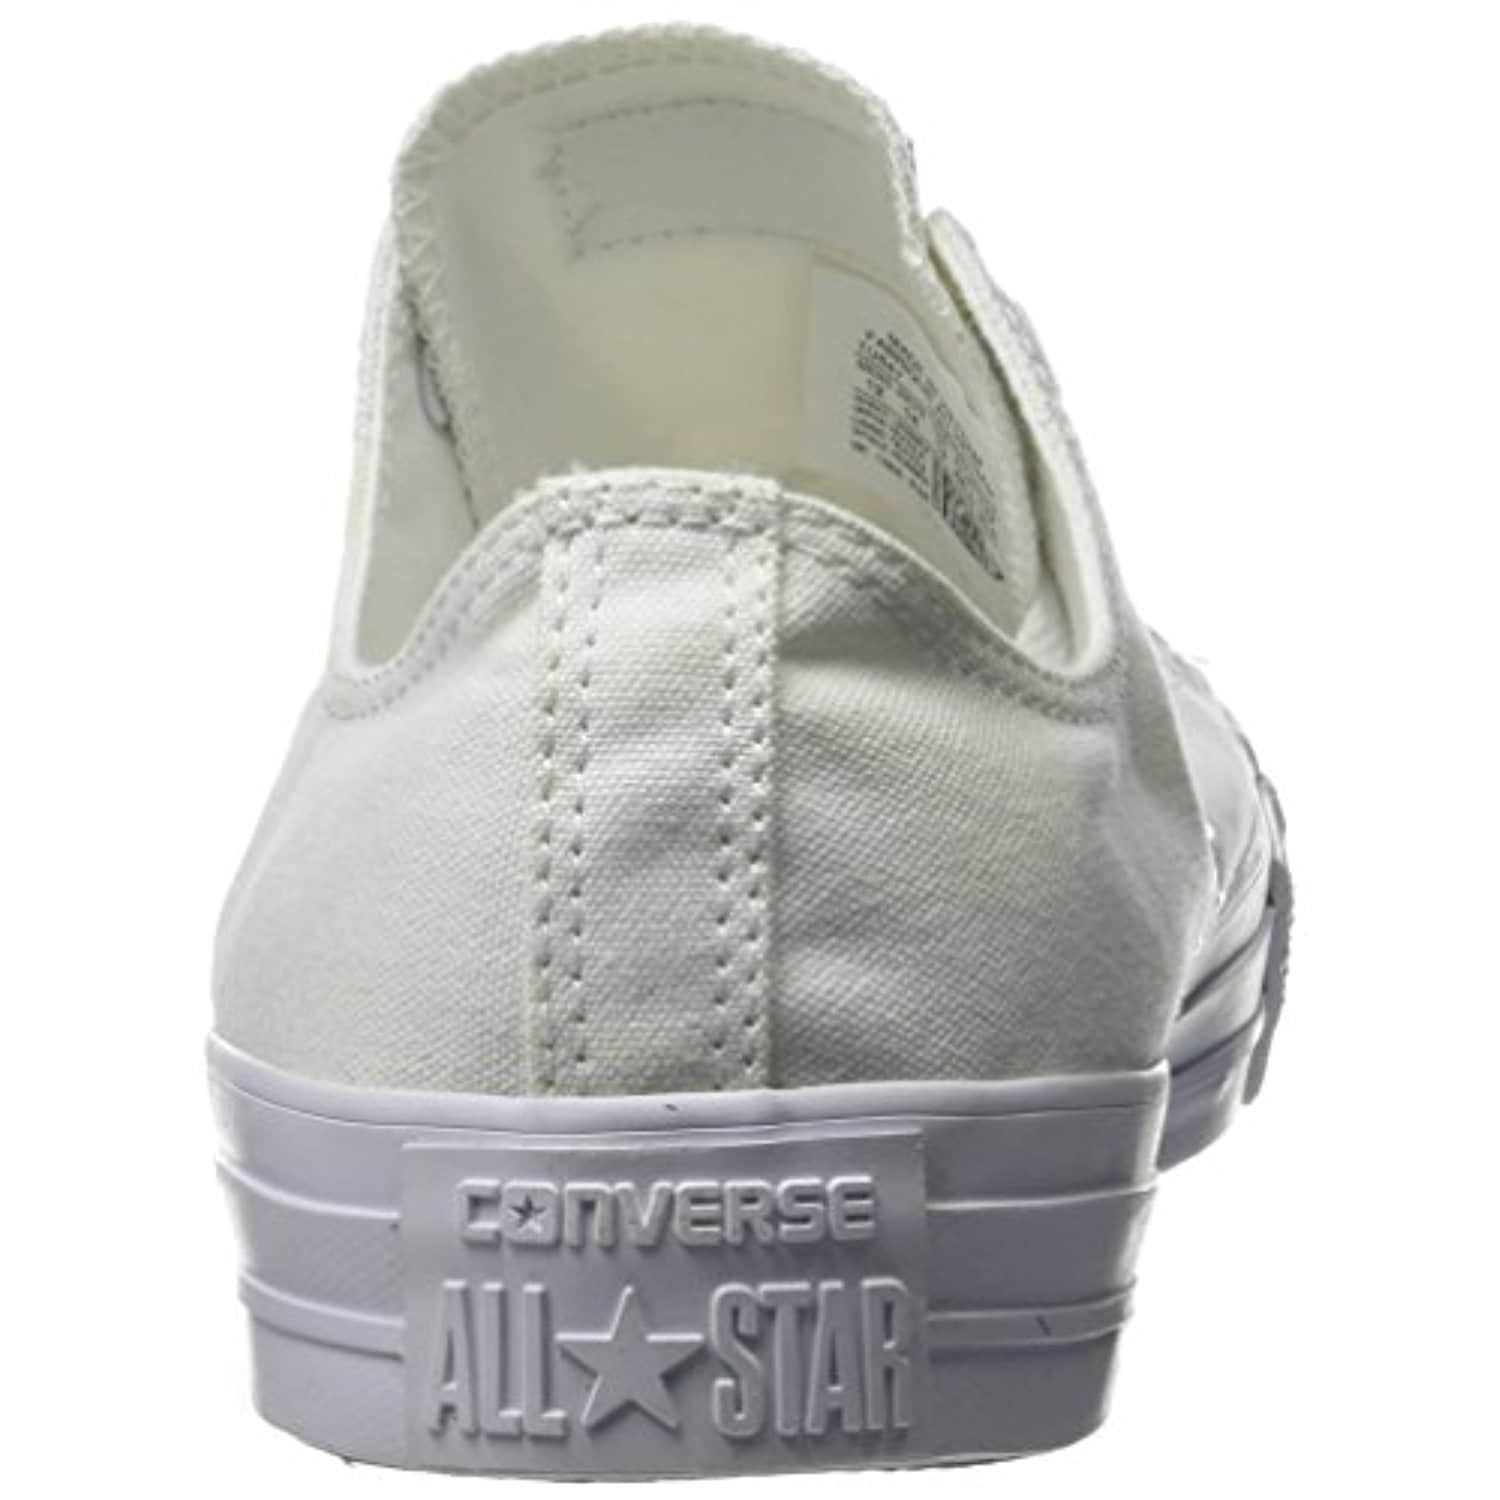 converse chuck taylor all star speciality ox low cut sneakers